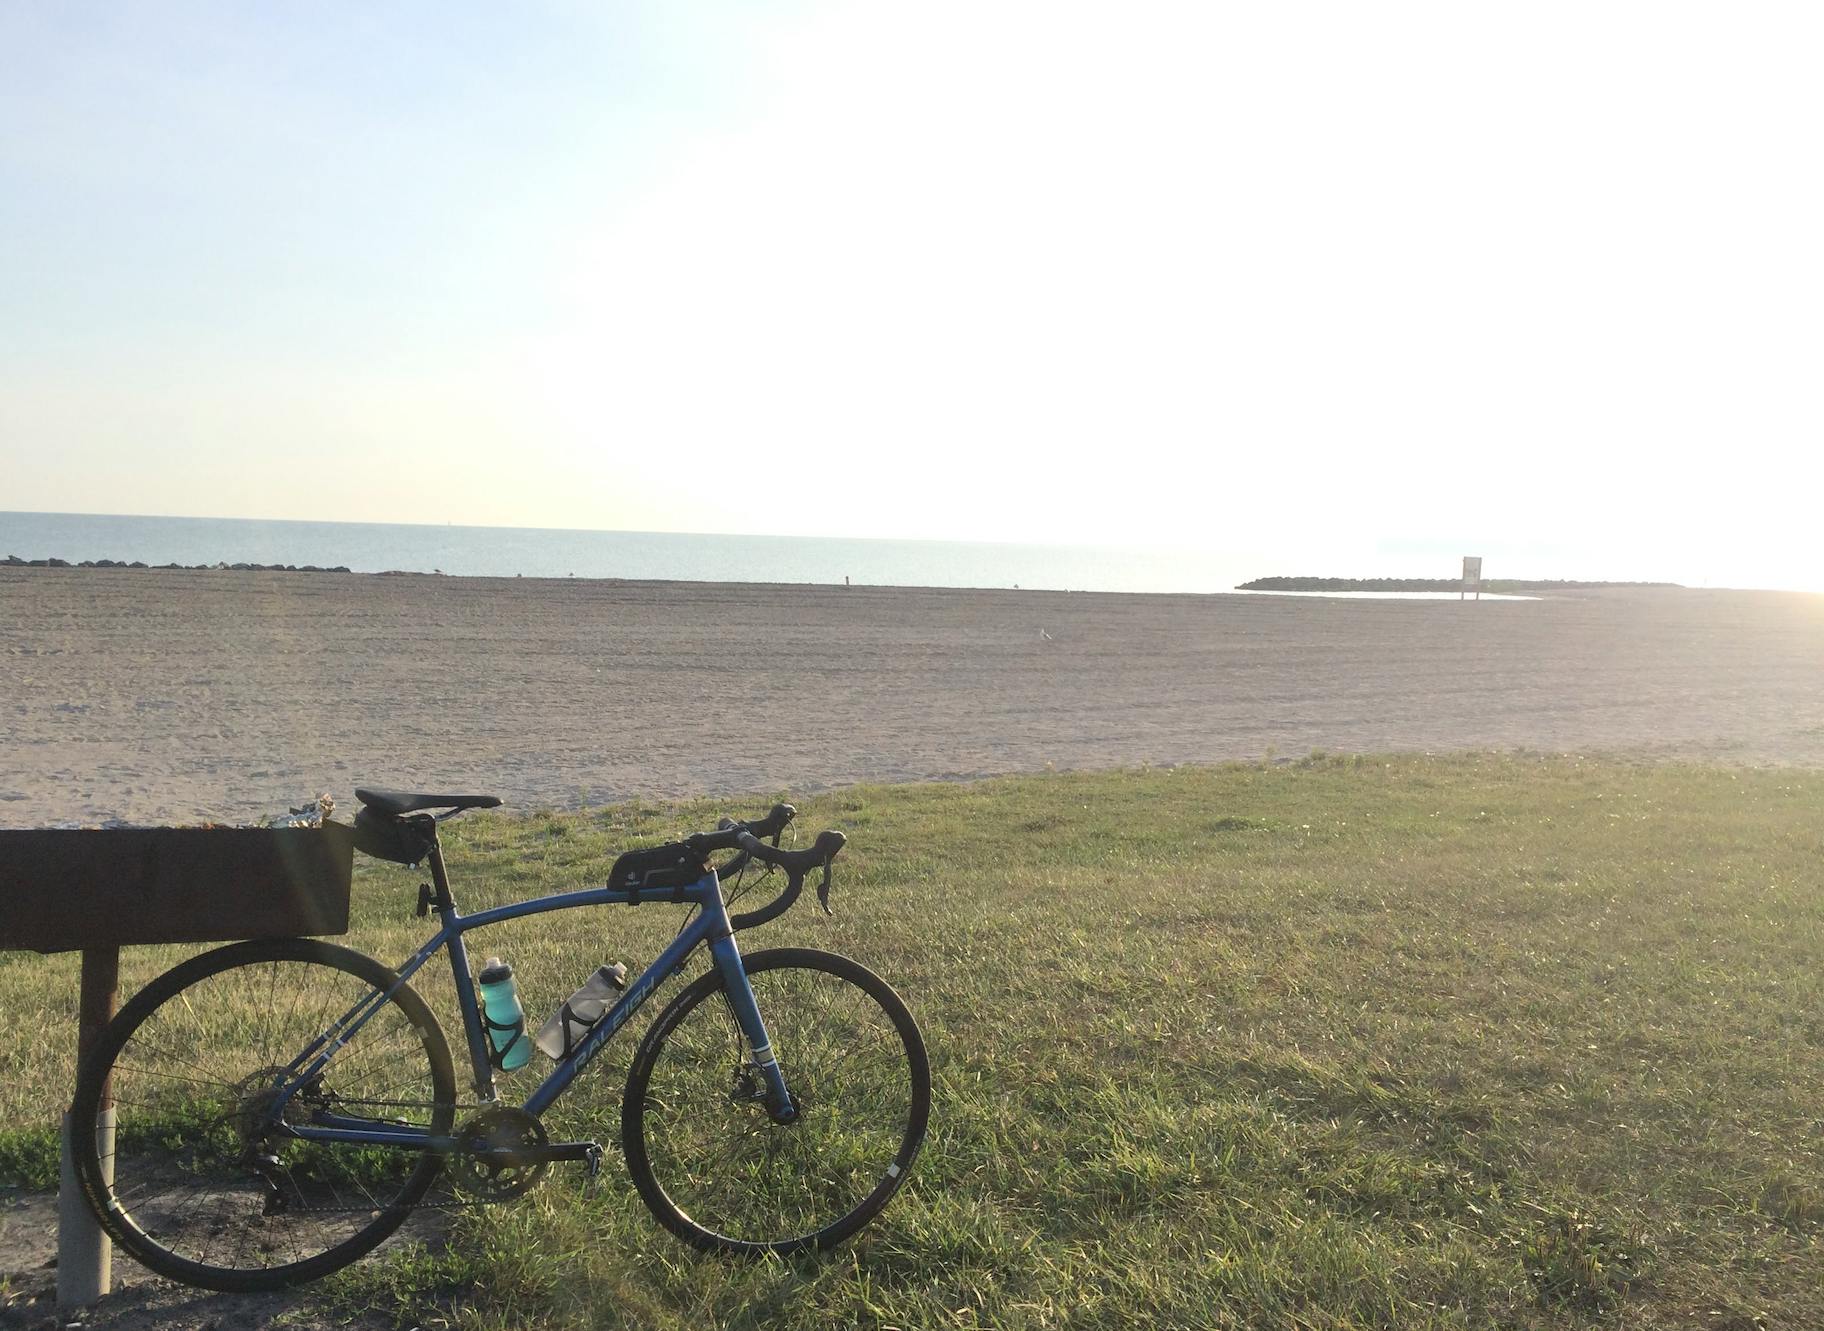 A bike is propped up in front of a sandy beach with an ocean in the background.